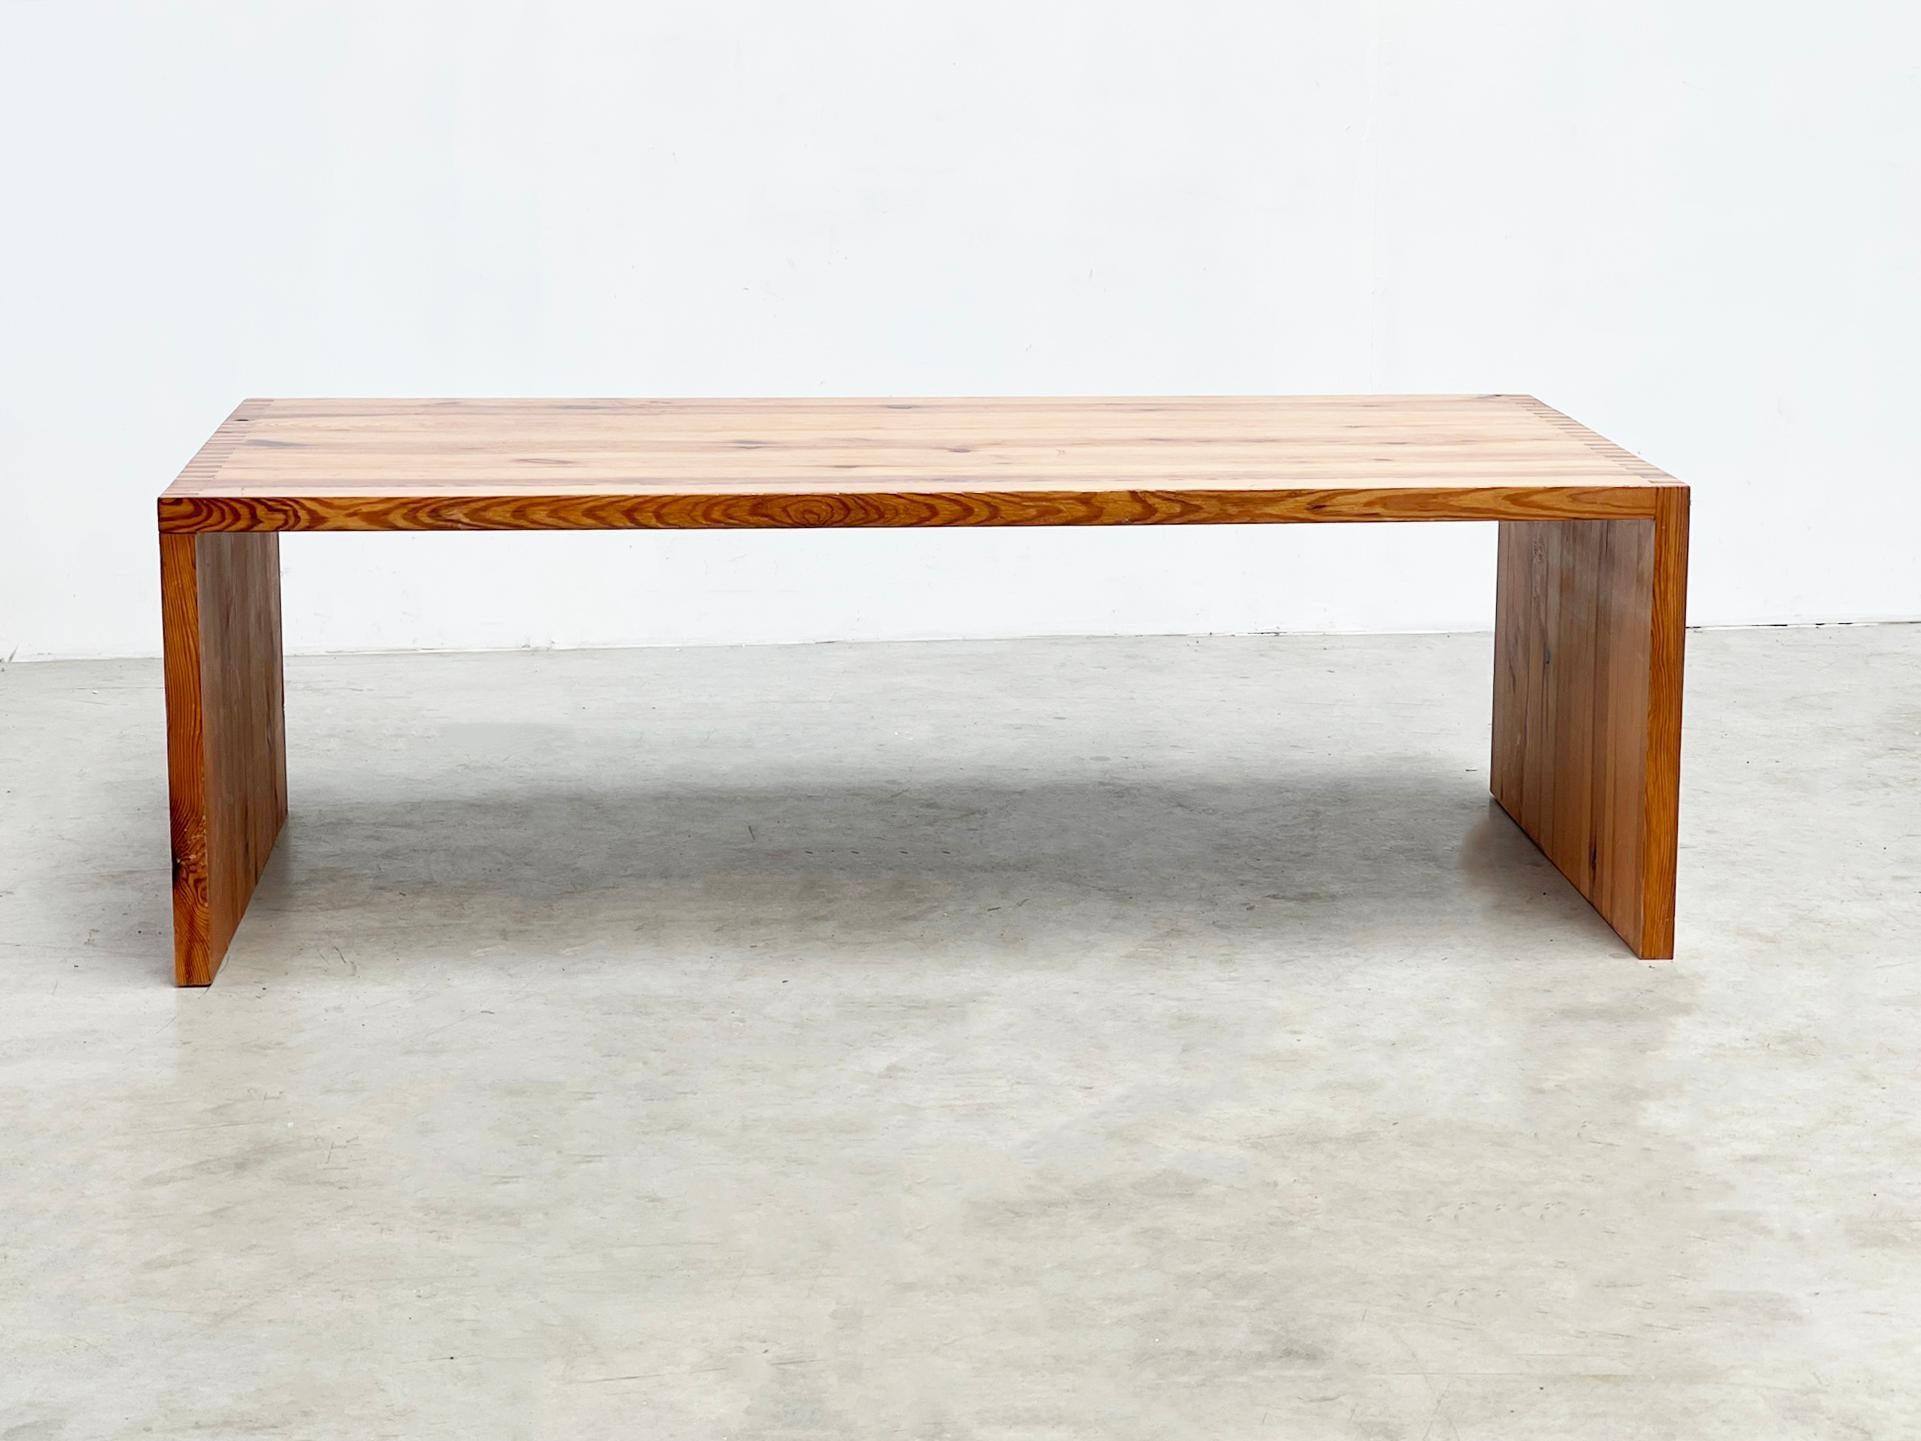  

The pine coffee table, crafted by Ate Van Apeldoorn in the 1970s for Houtwerk Hattem, is a perfect example of Dutch craftsmanship with its timeless design and sturdy pine construction. 

 

Measurements:

Width: 154cm

Depth: 74cm

Height: 50cm